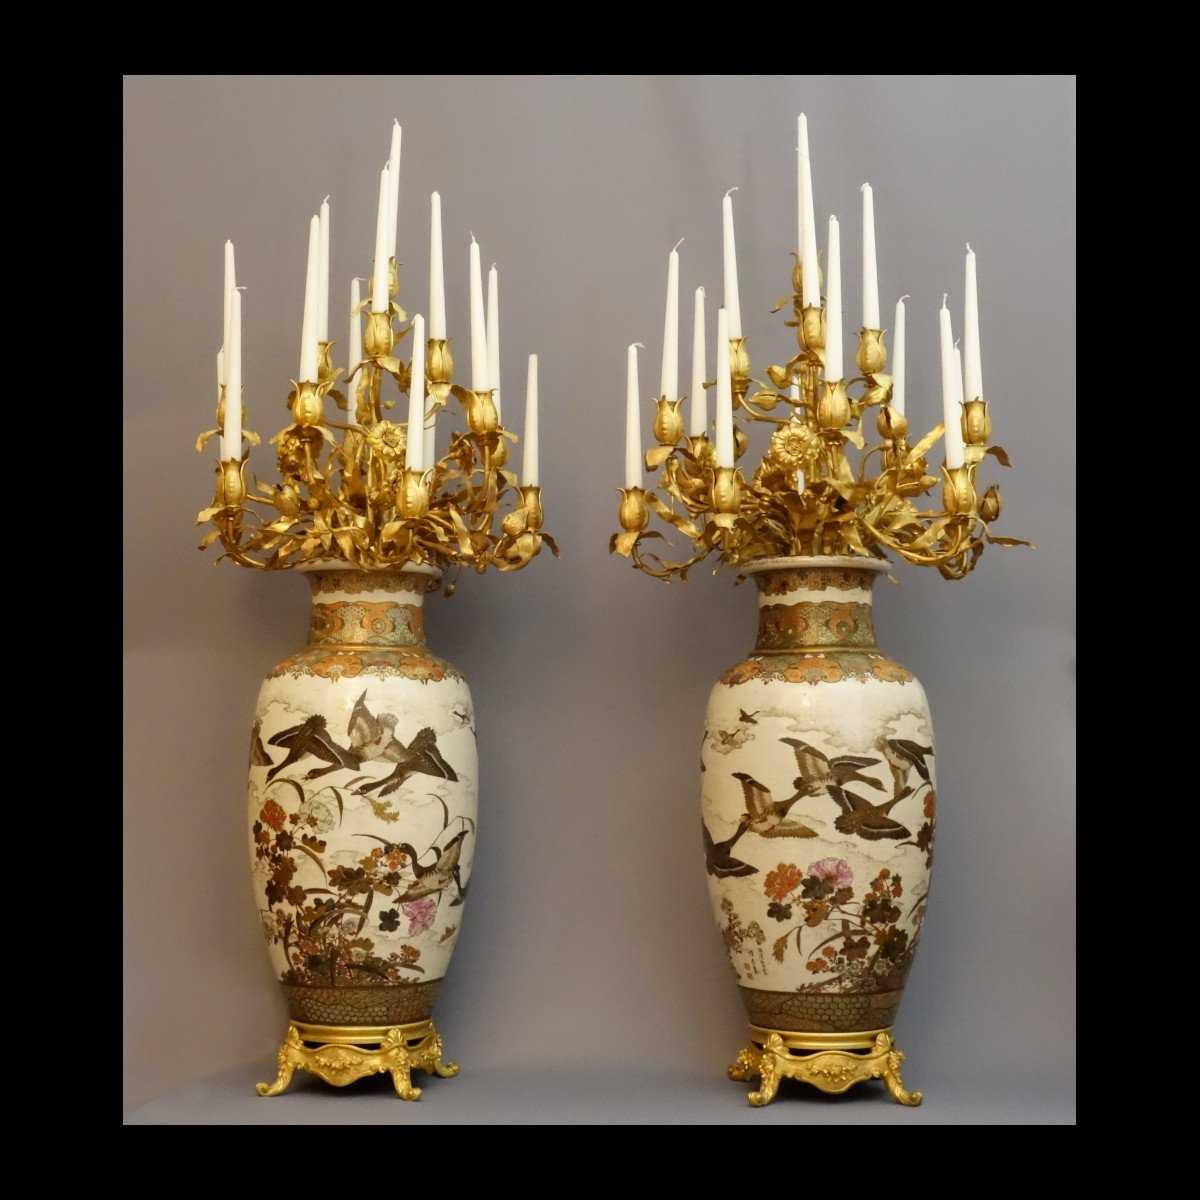 Pair Of Important Candelabras Mounted On XIXth Vases